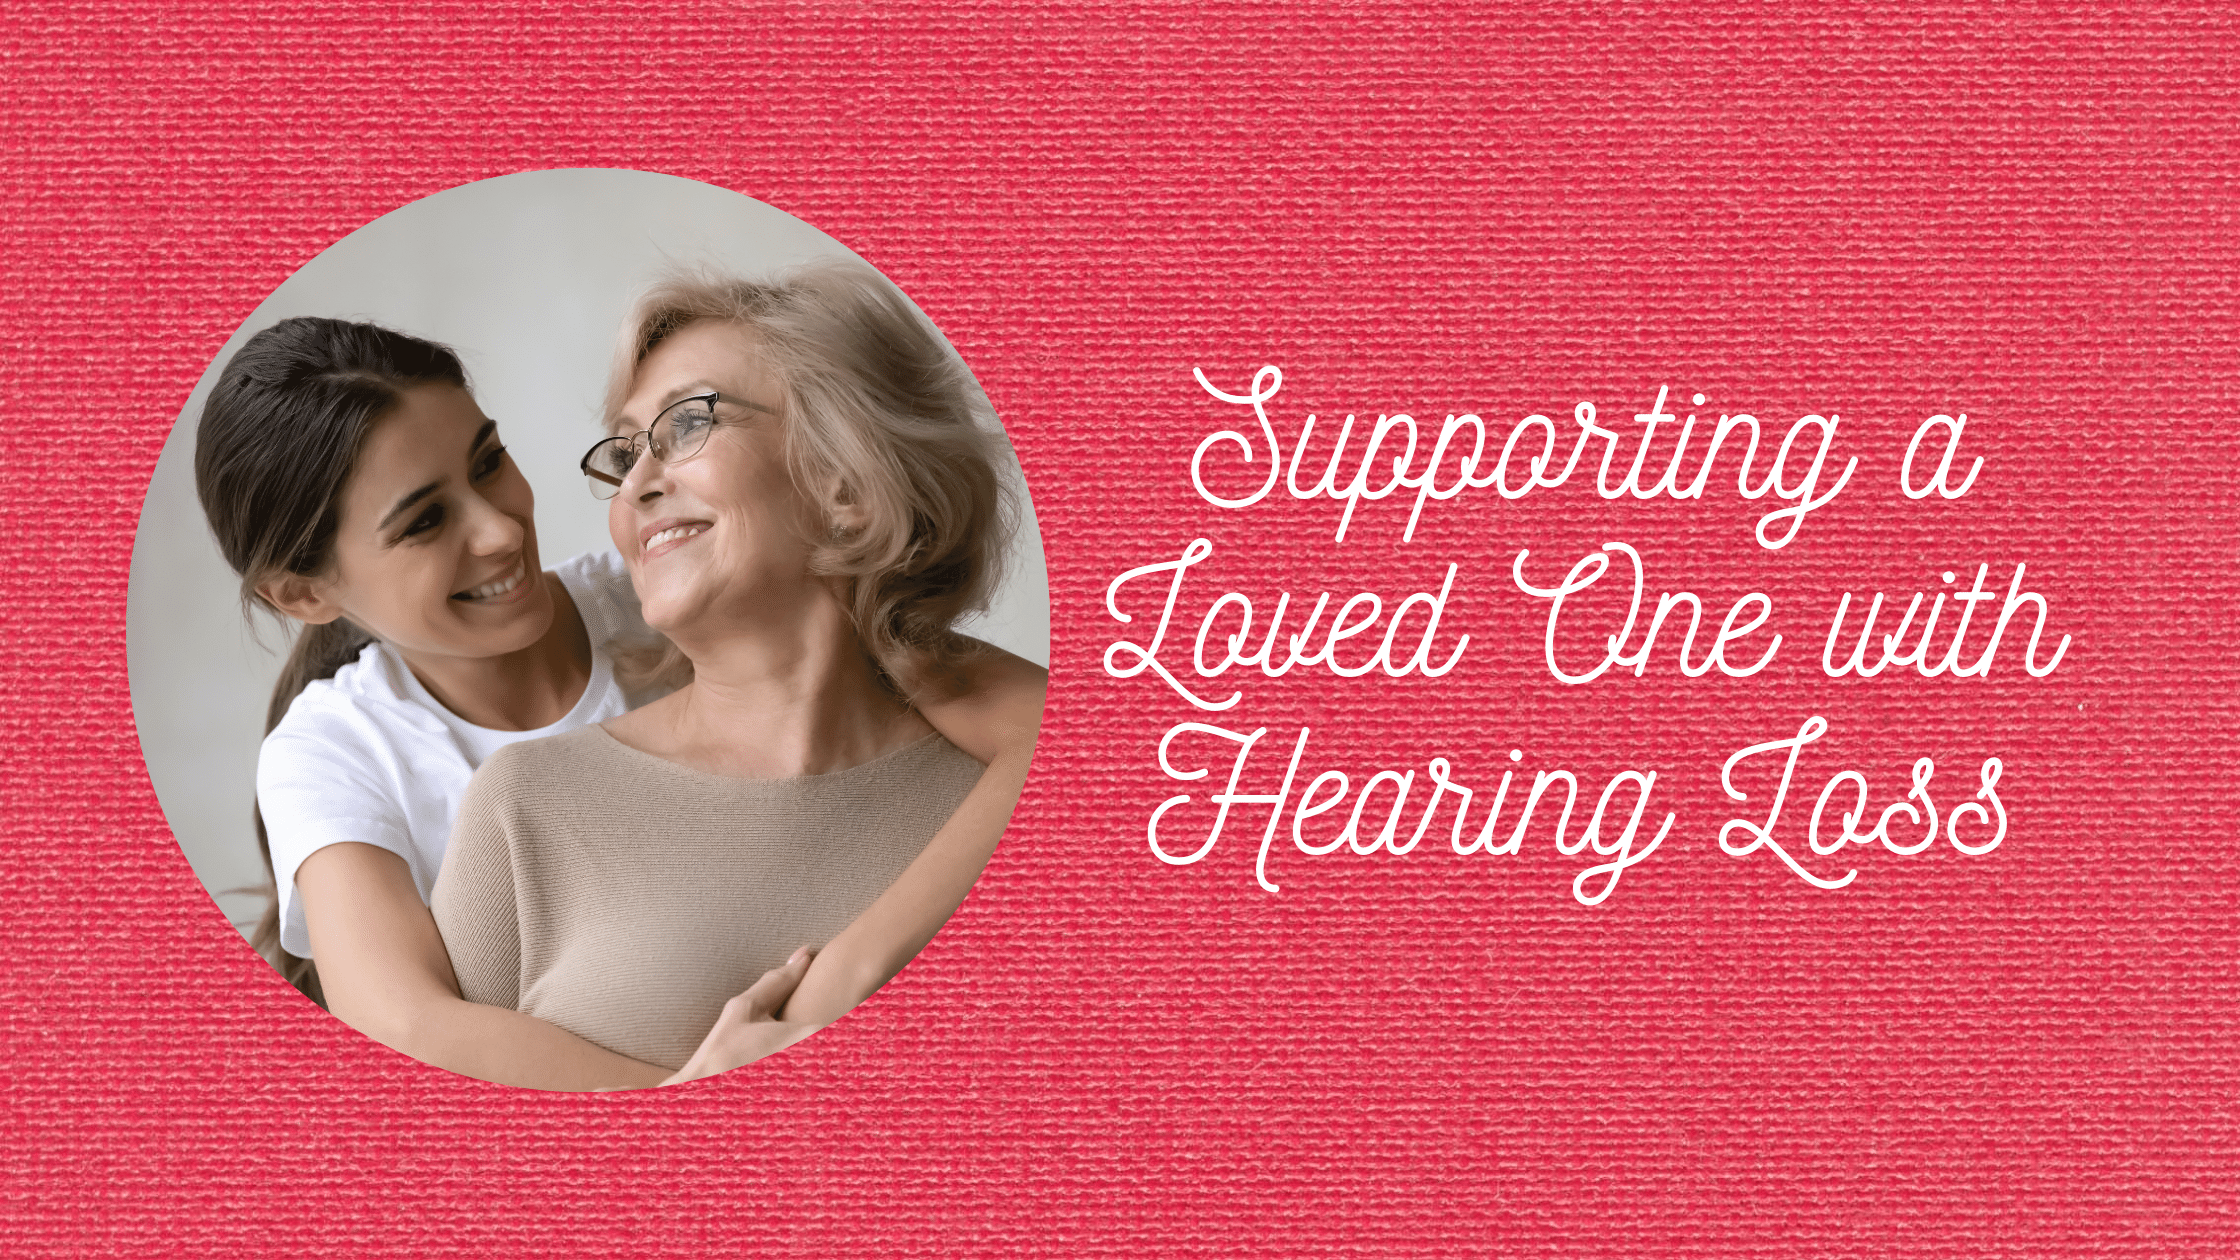 Supporting a Loved One with Hearing Loss